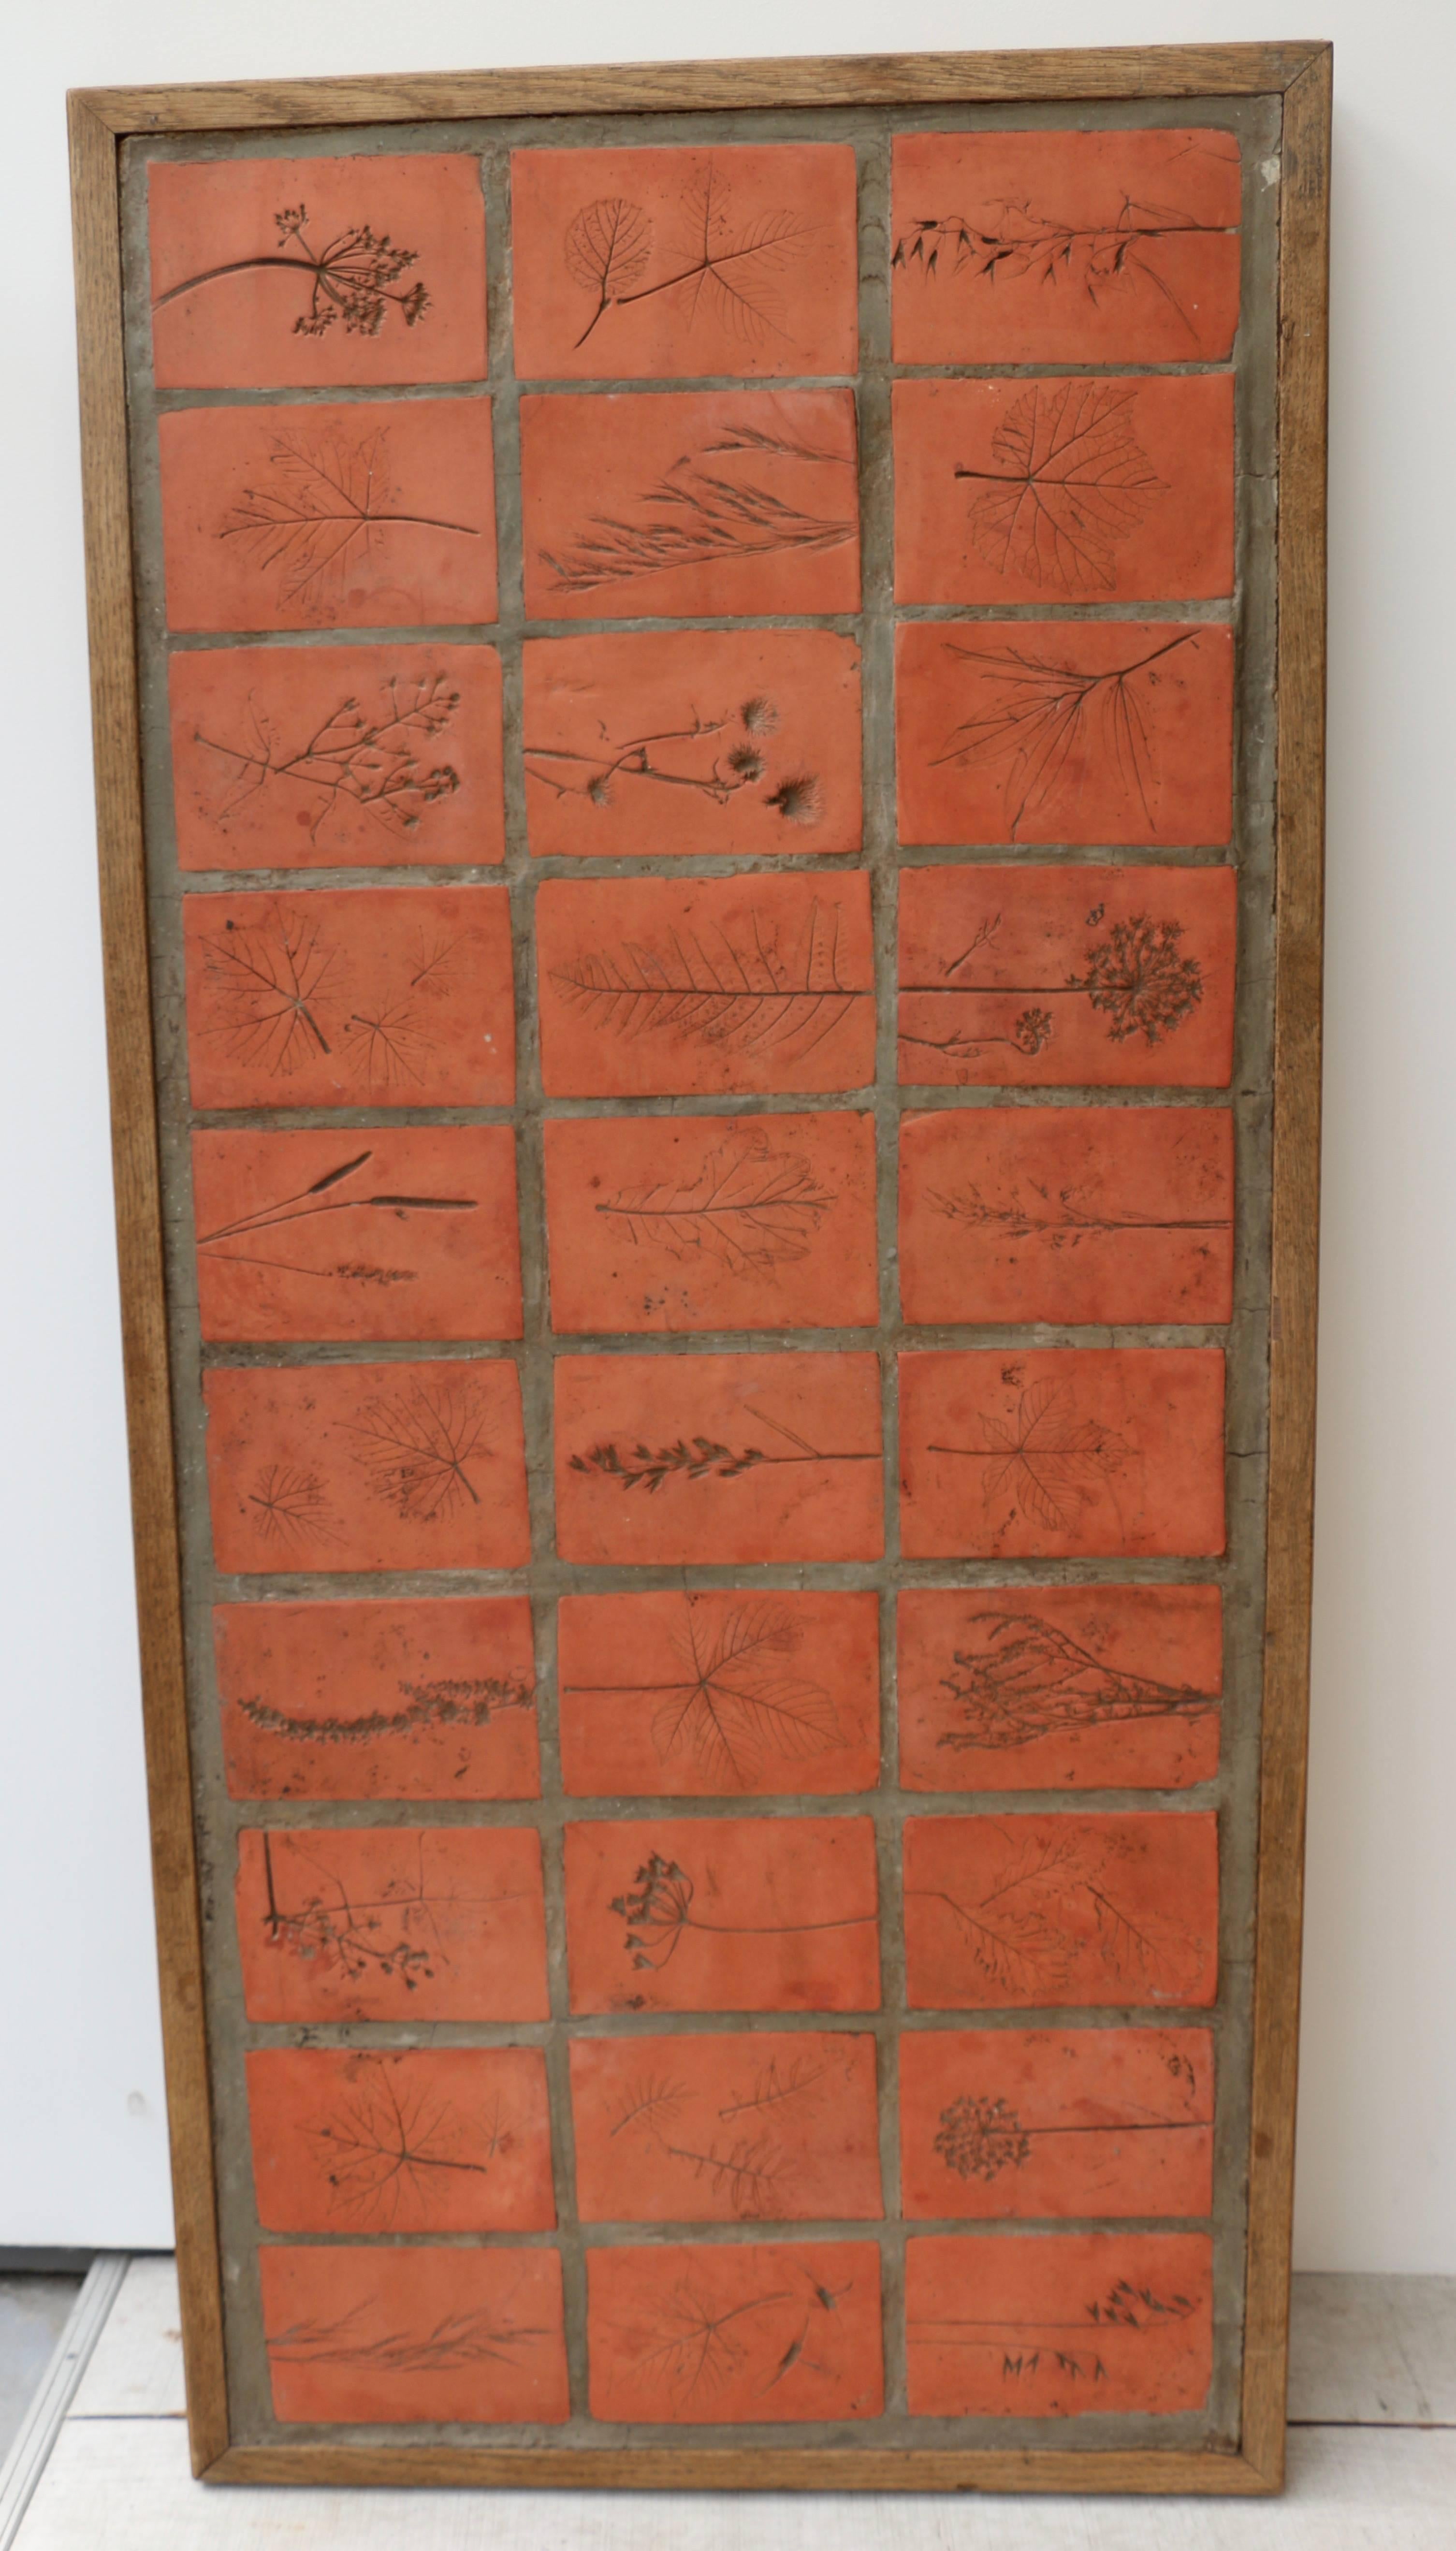 1963, Roger Capron, large panel in terracotta and oak from the herbarium series. Tomettes are all decorated with foliage and flowers.